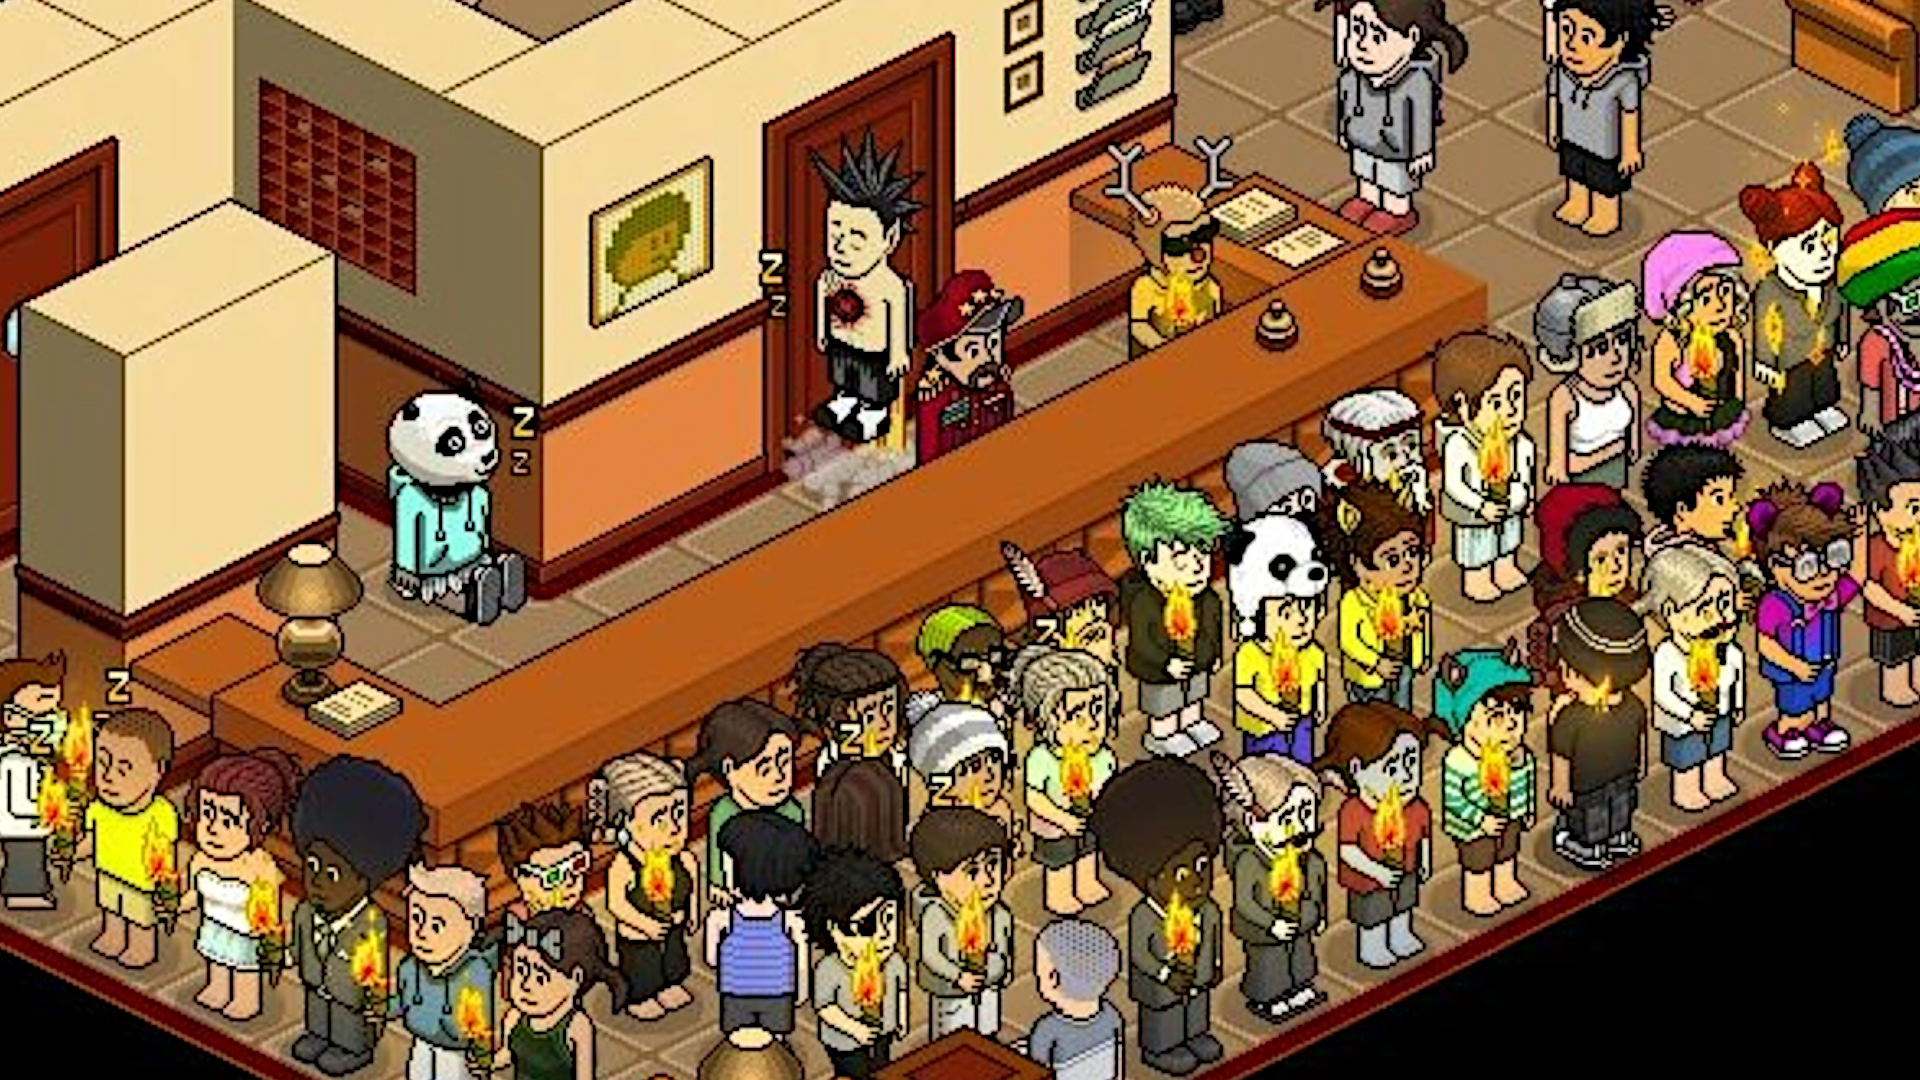 An image of the Great Mute of Habbo Hotel, with many Habbos holding up torches.